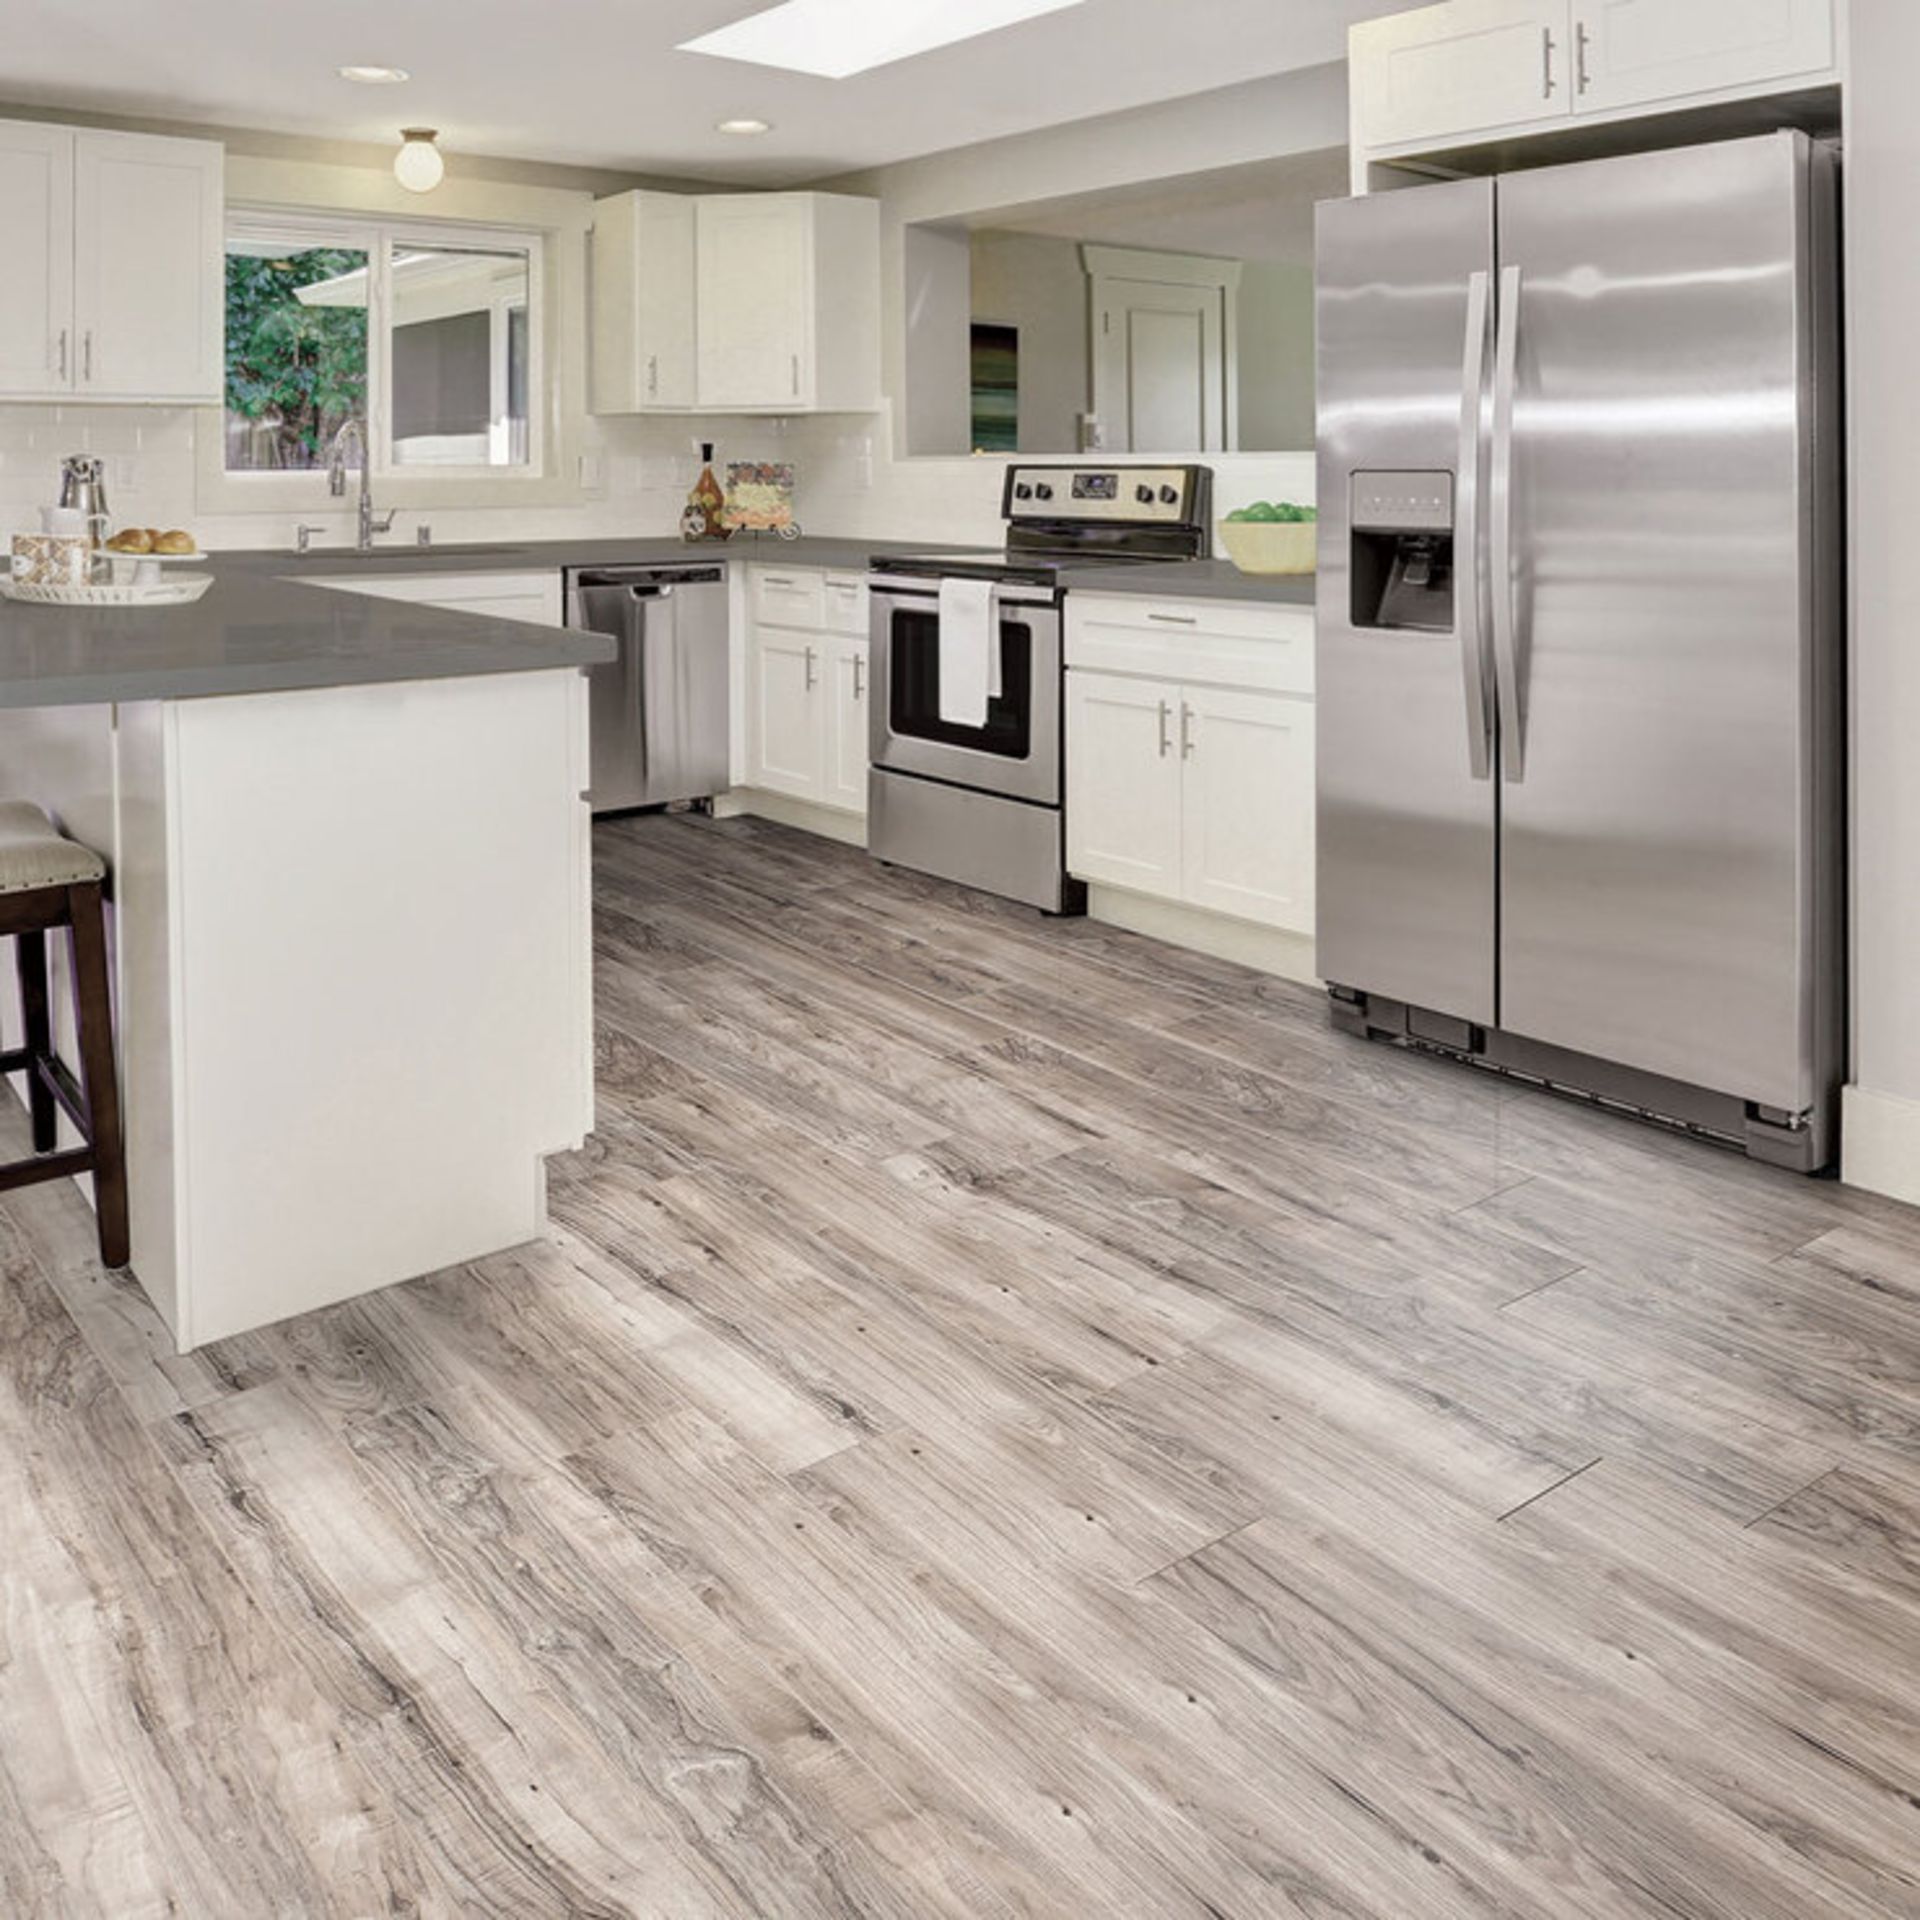 1 BOXED GOLDEN SELECT LAMINATE FLOORING IN GREY WALNUT (COVERS APPROXIMATELY 1.162m2 PER PACK) RRP